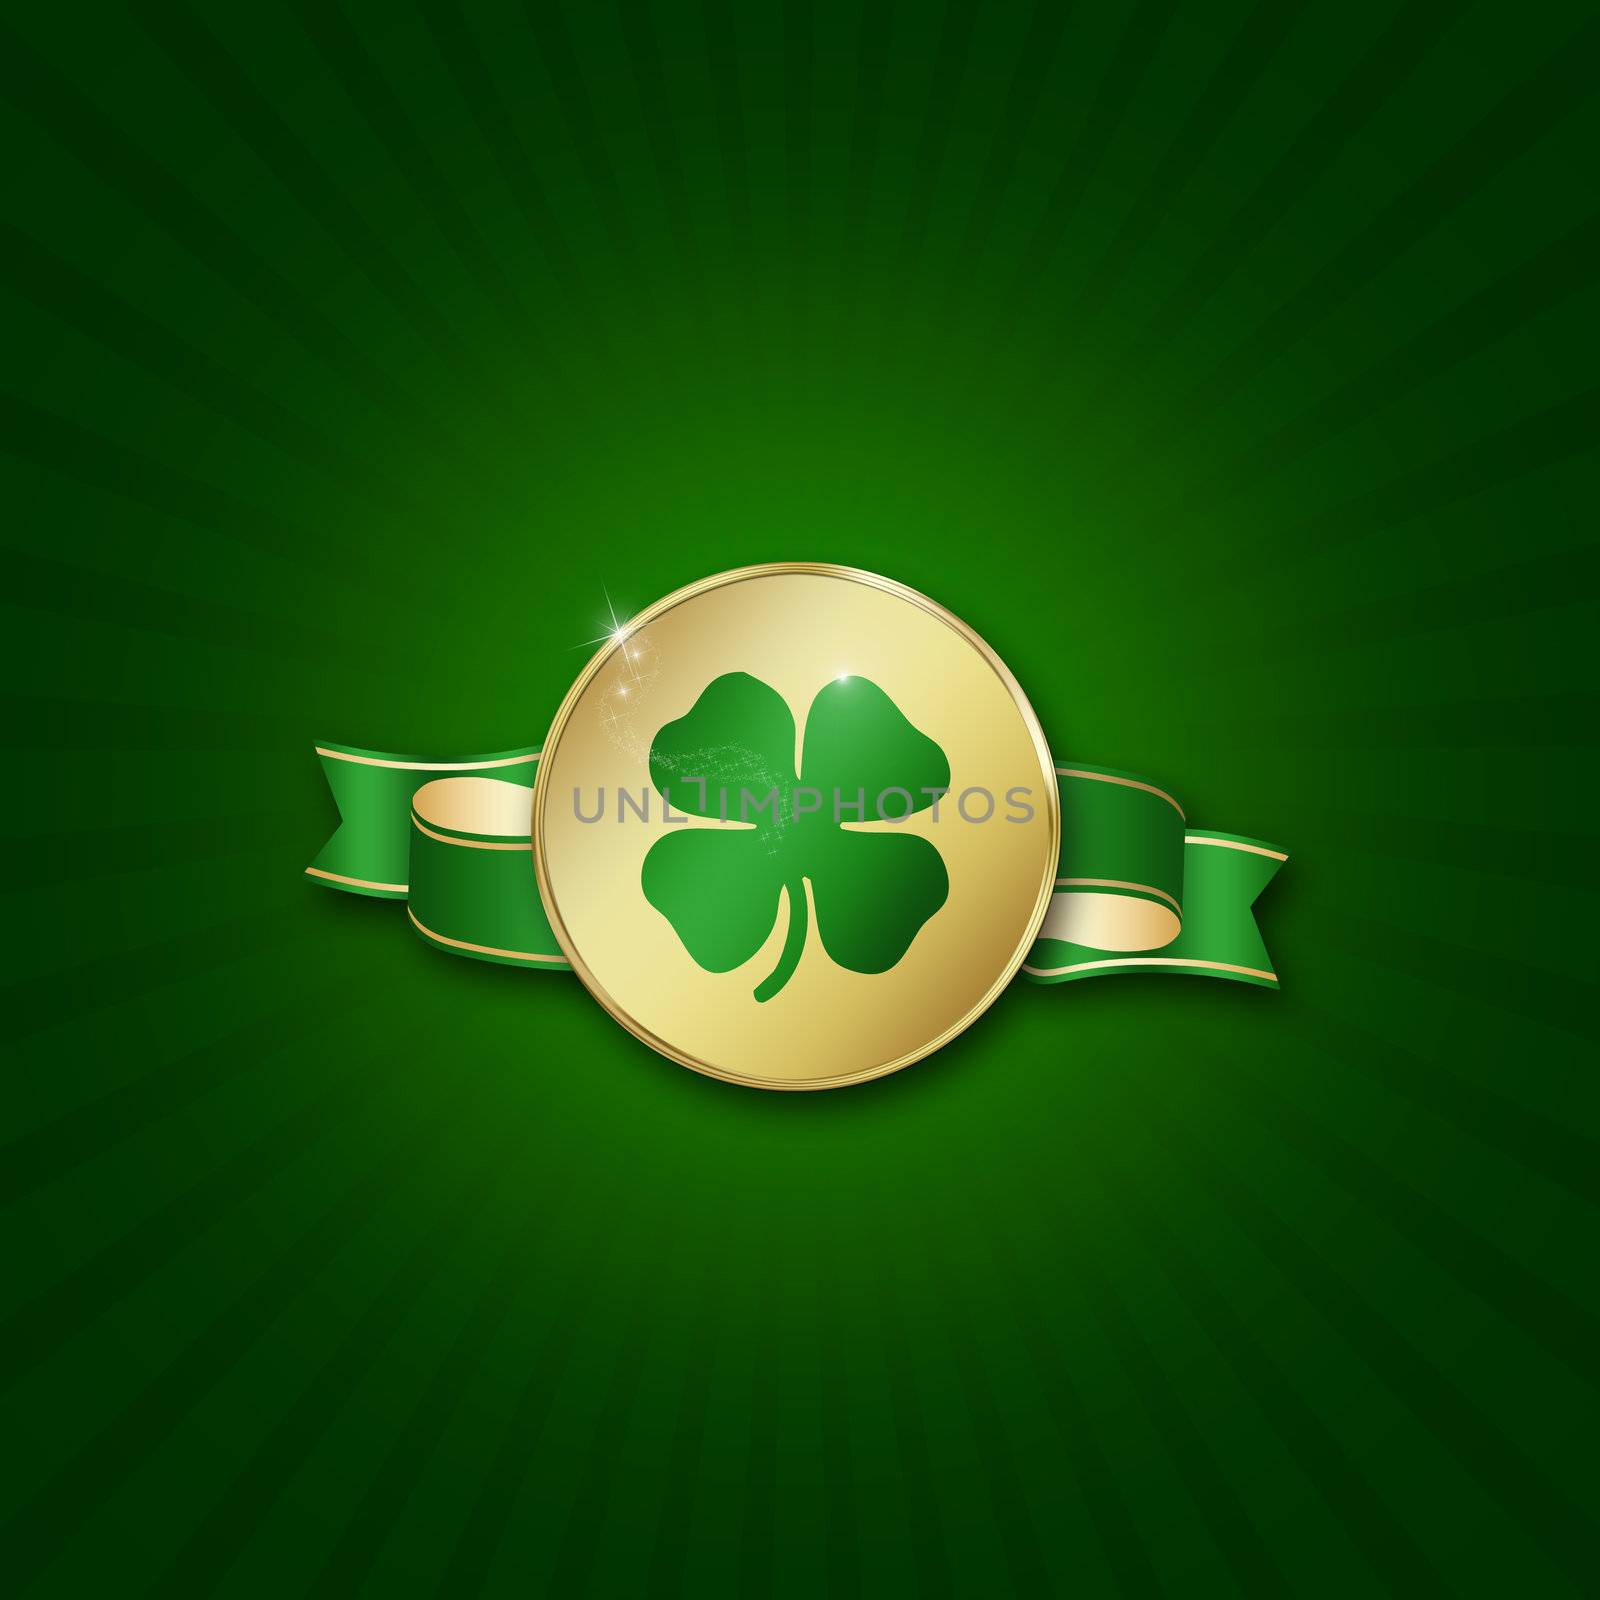 St. Patrick´s Day illustration: A golden coin with a shamrock and ribbon on a green background.